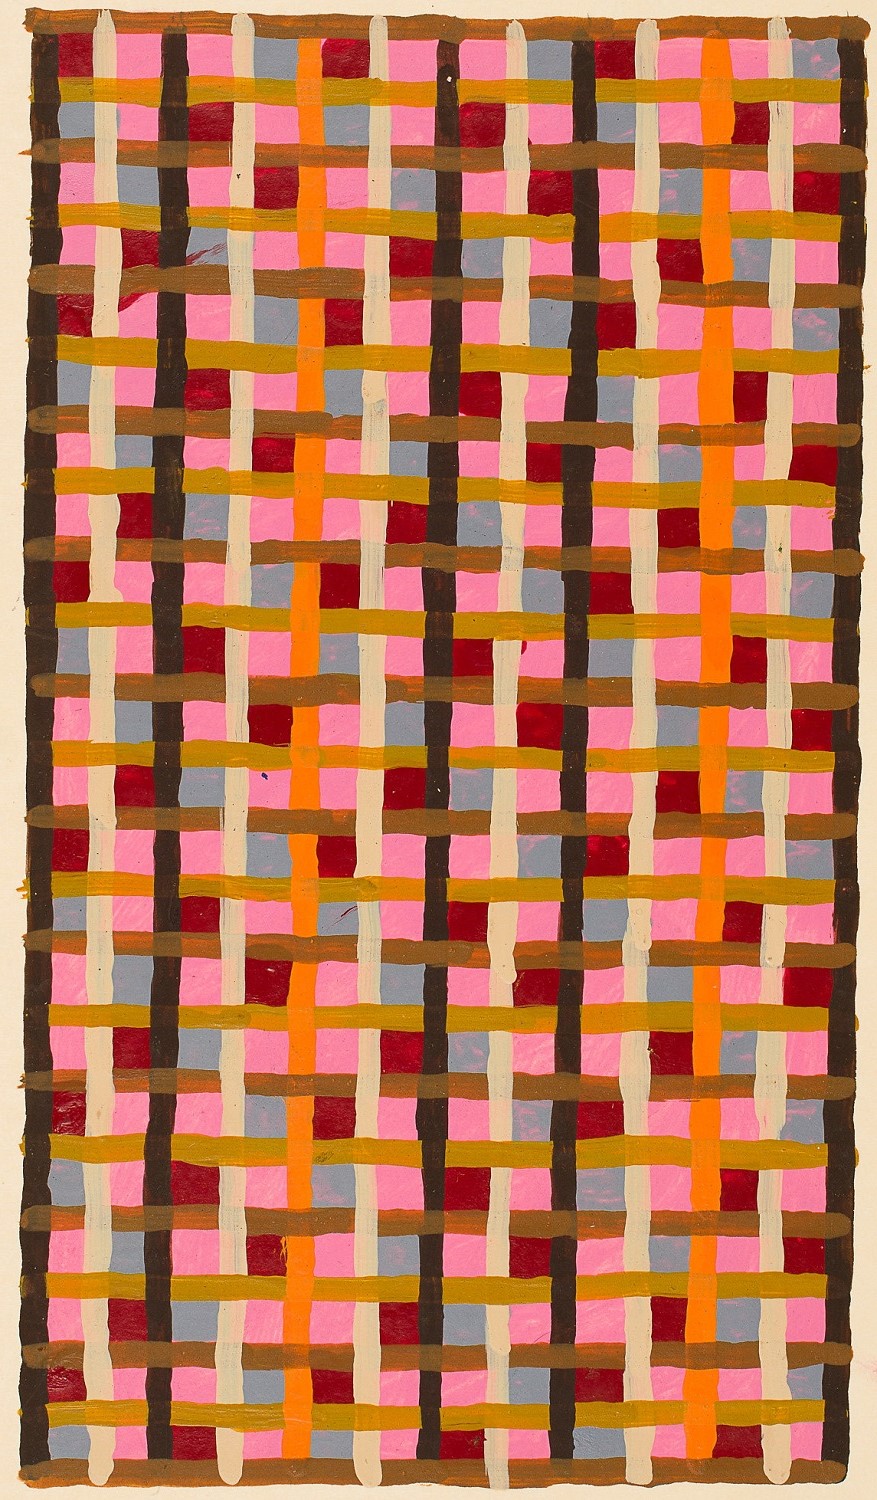  Peter Young,  Linear Weave Study,  1979, Acrylic on Manila folder, 4 5/8 x 9 1/4 inches (11.7 x 23.5 cm) 